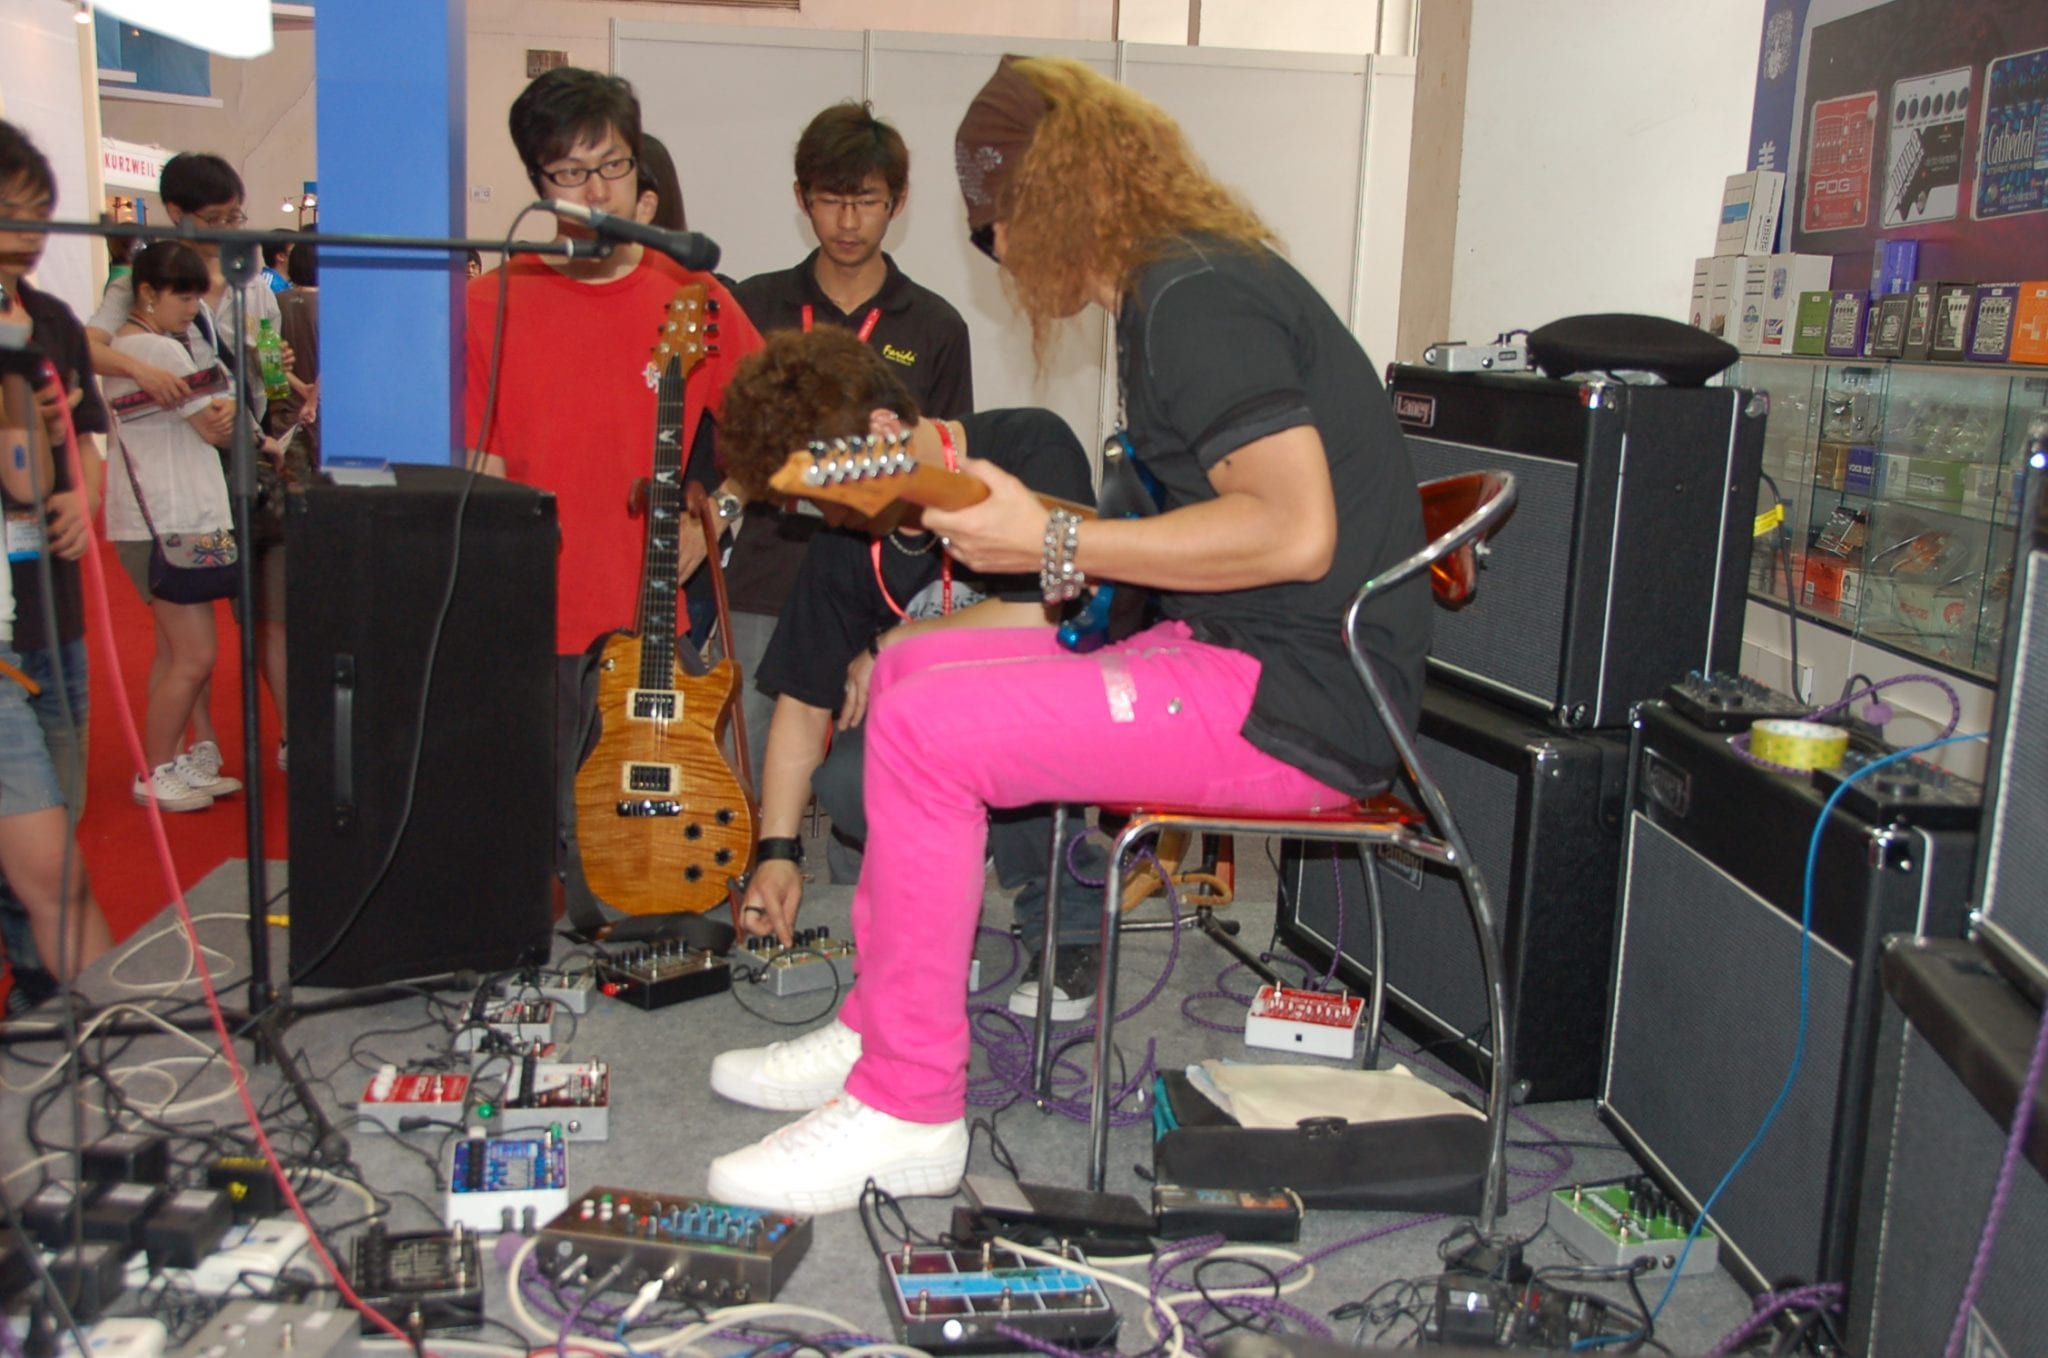 EHX at the Beijing show 2010